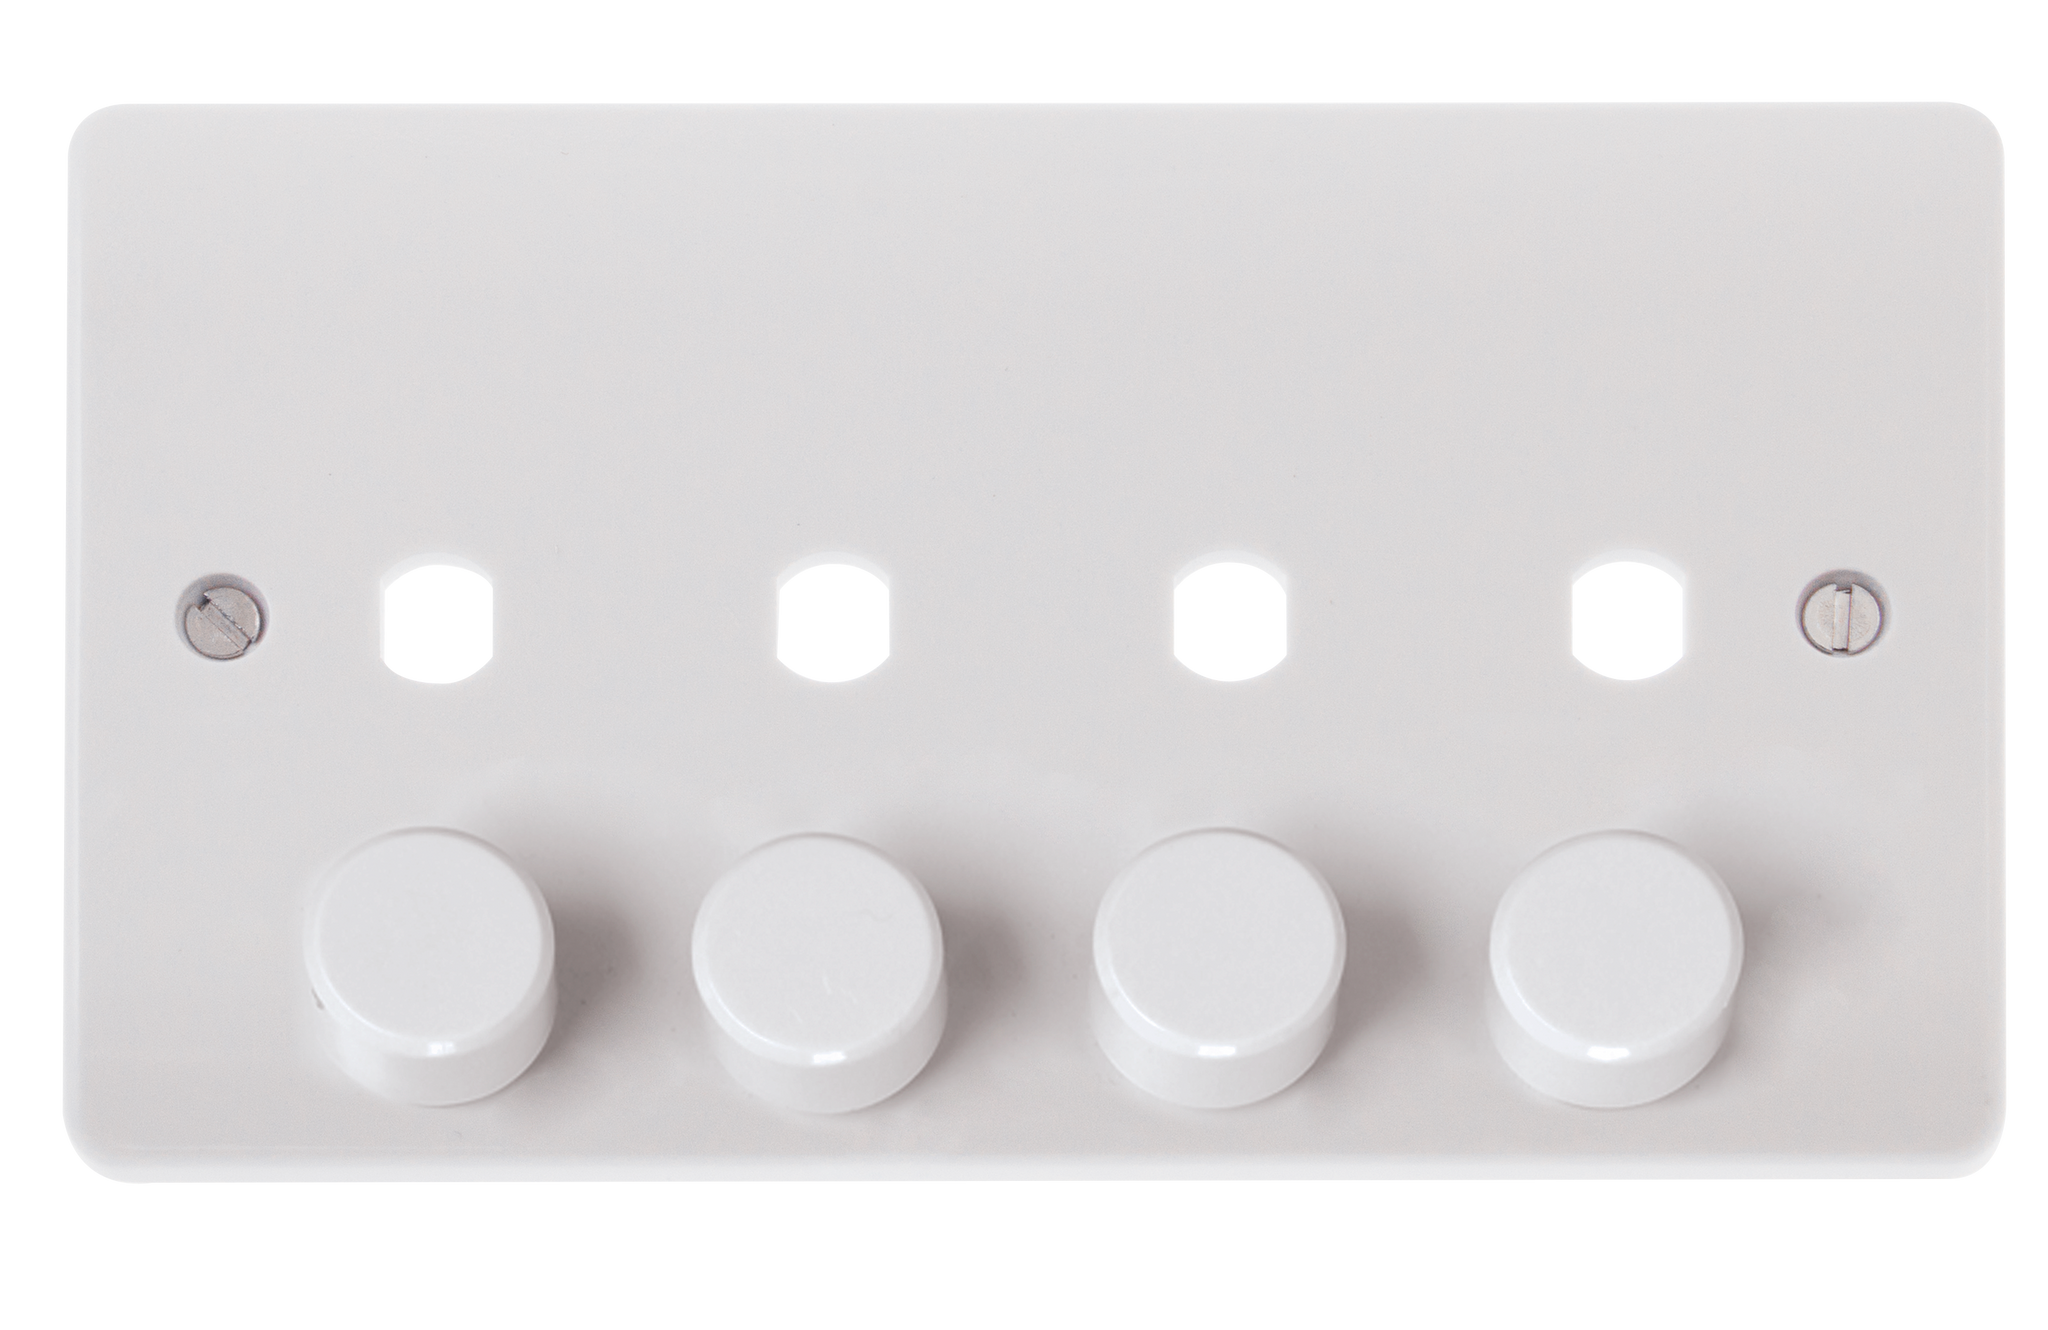 CLICK MODE MODE 4 GANG DOUBLE DIMMER PLATE & KNOBS